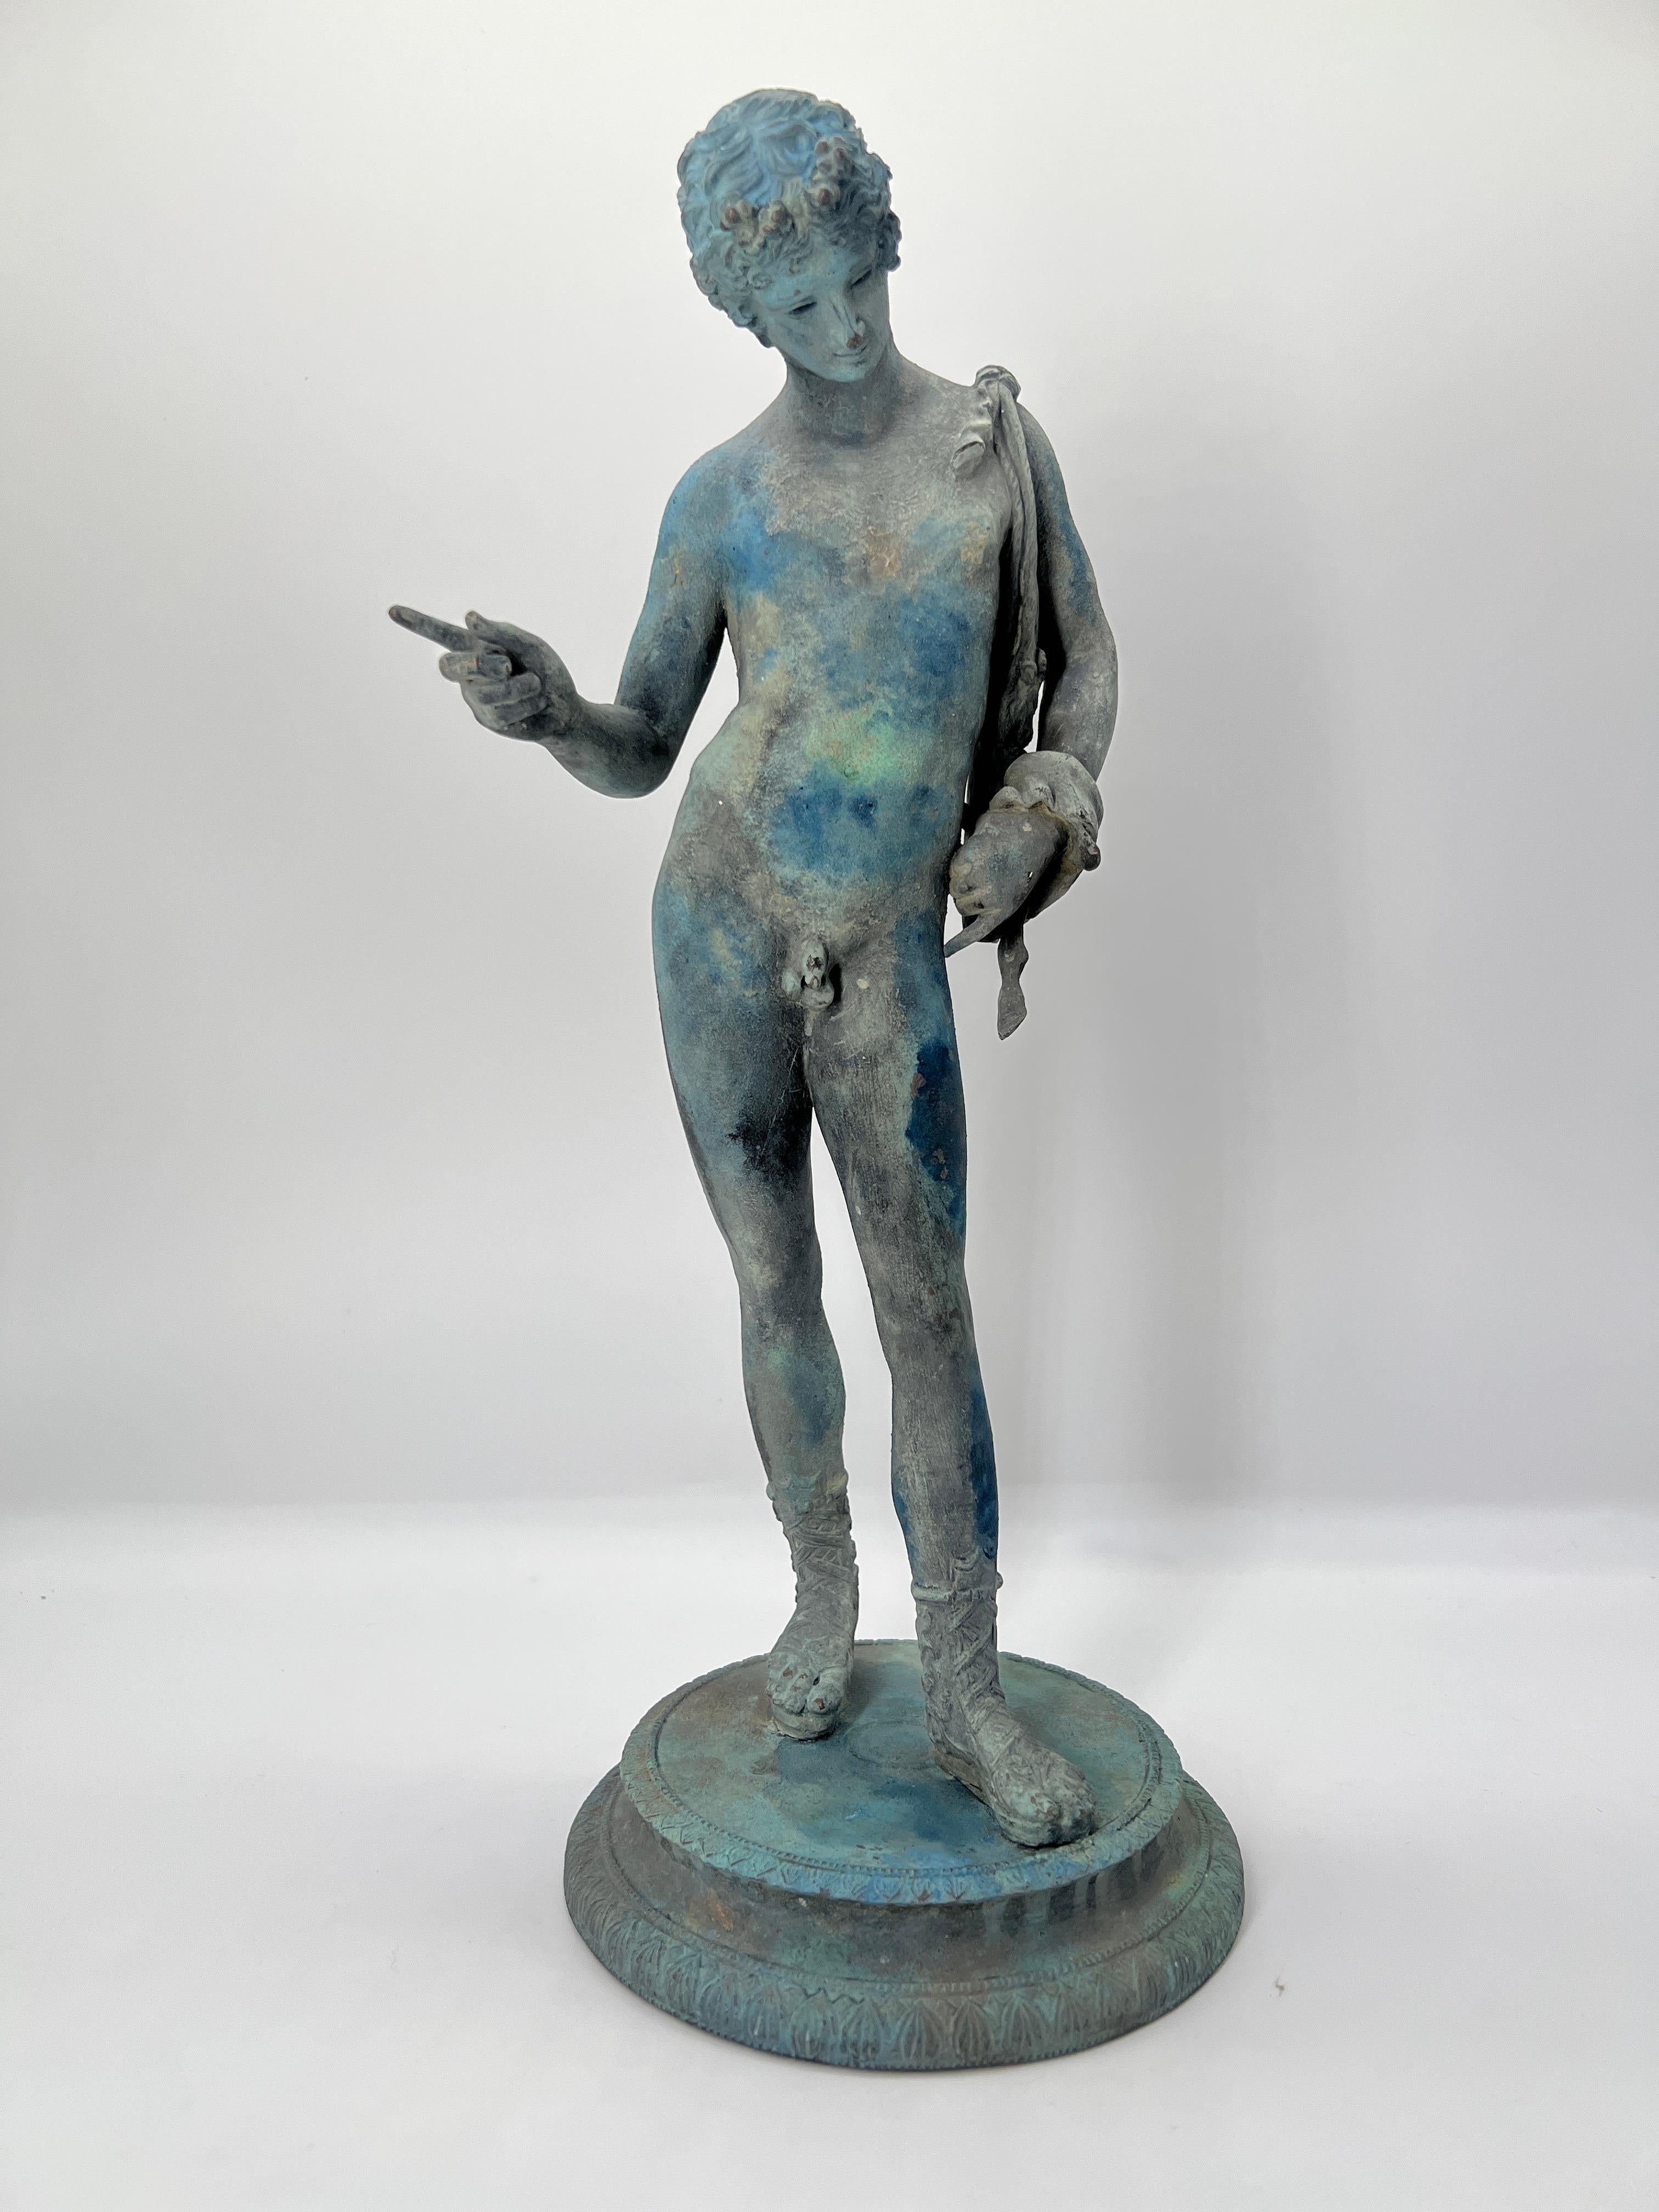 Italian, late 19th century.

A 'Grand Tour' patinated bronze figure of a young man, representing Dionysos (Bacchus), previously thought to be Narcissus. 

Good quality with heavy patination to surface. Coveted by the 19th century intellectuals and